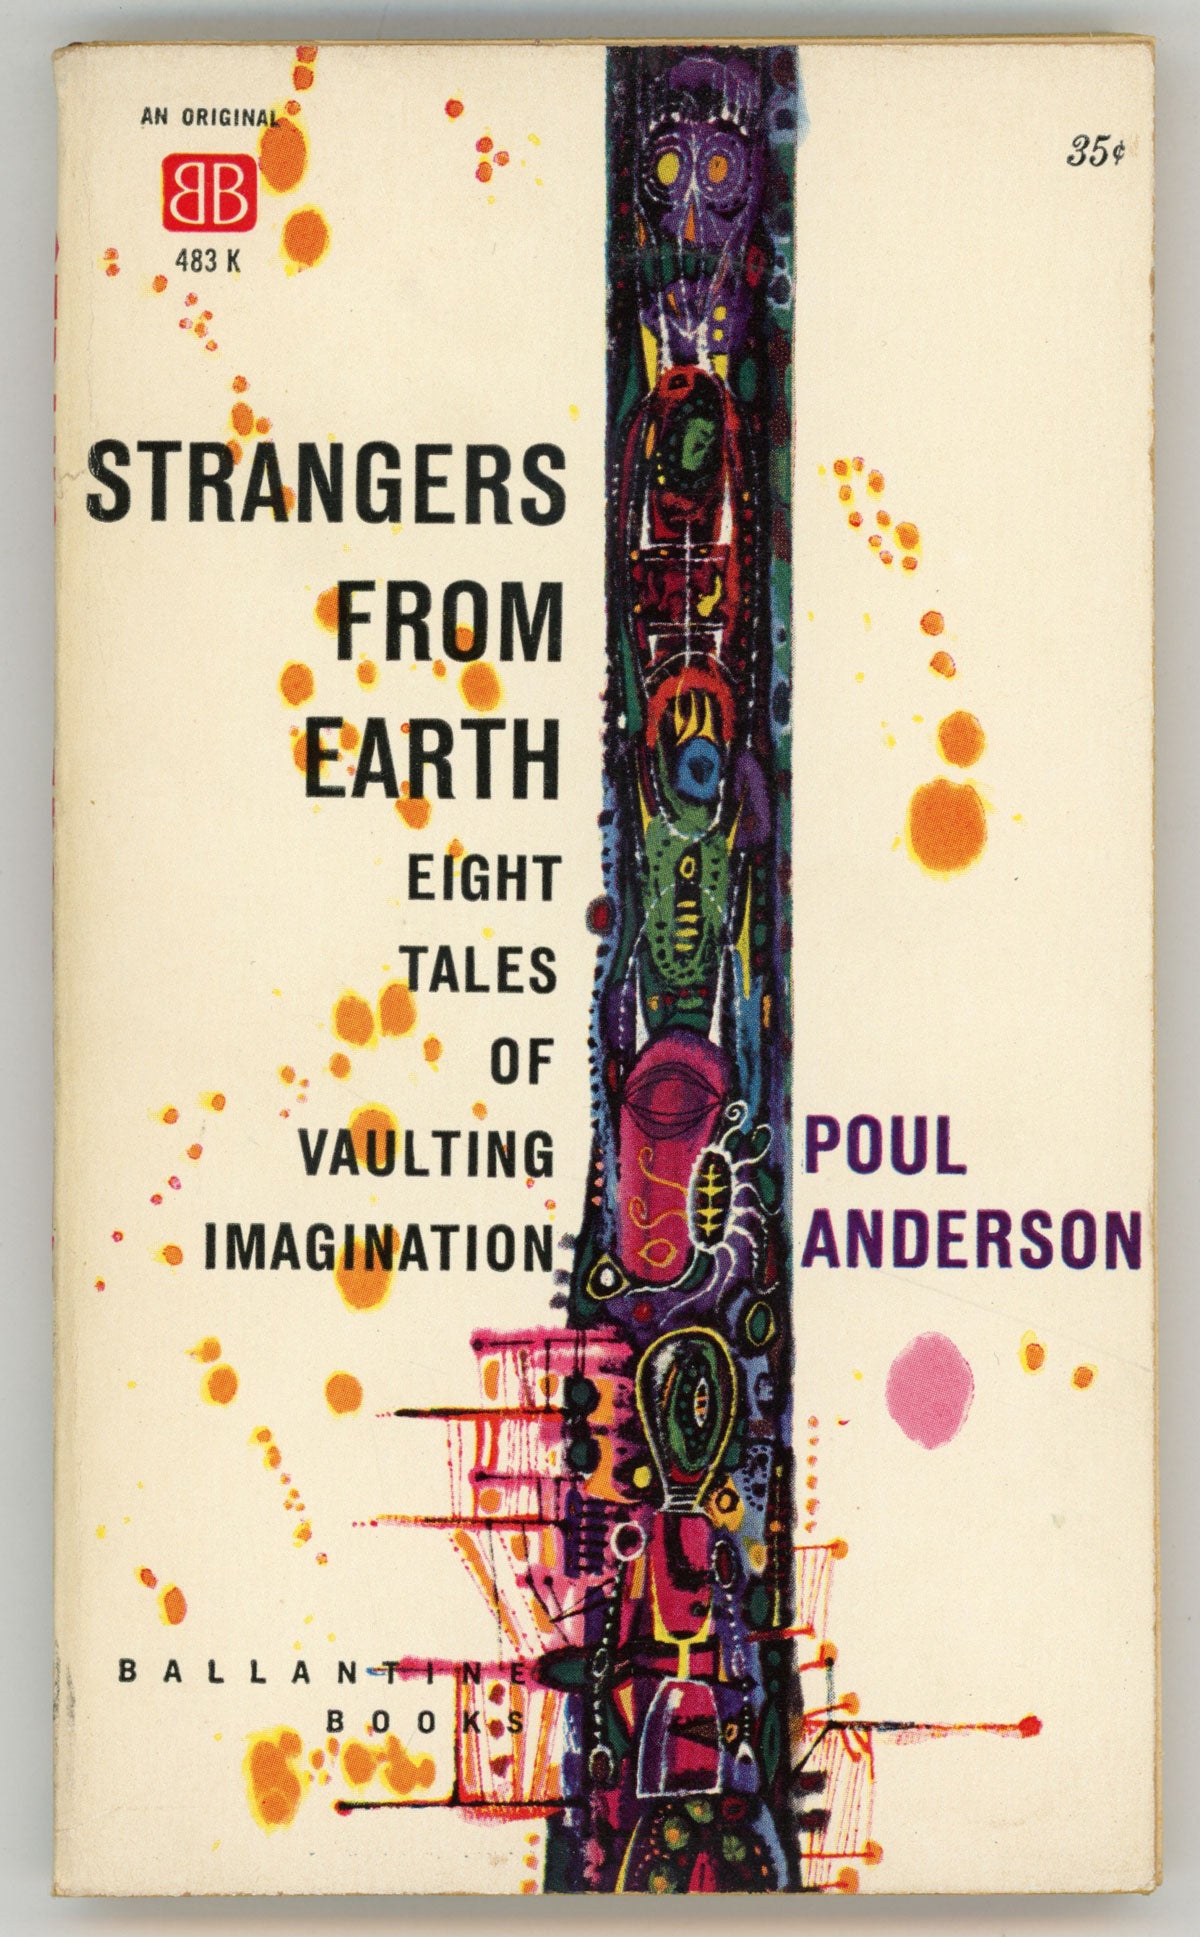 STRANGERS FROM EARTH by Poul Anderson on L. W. Currey